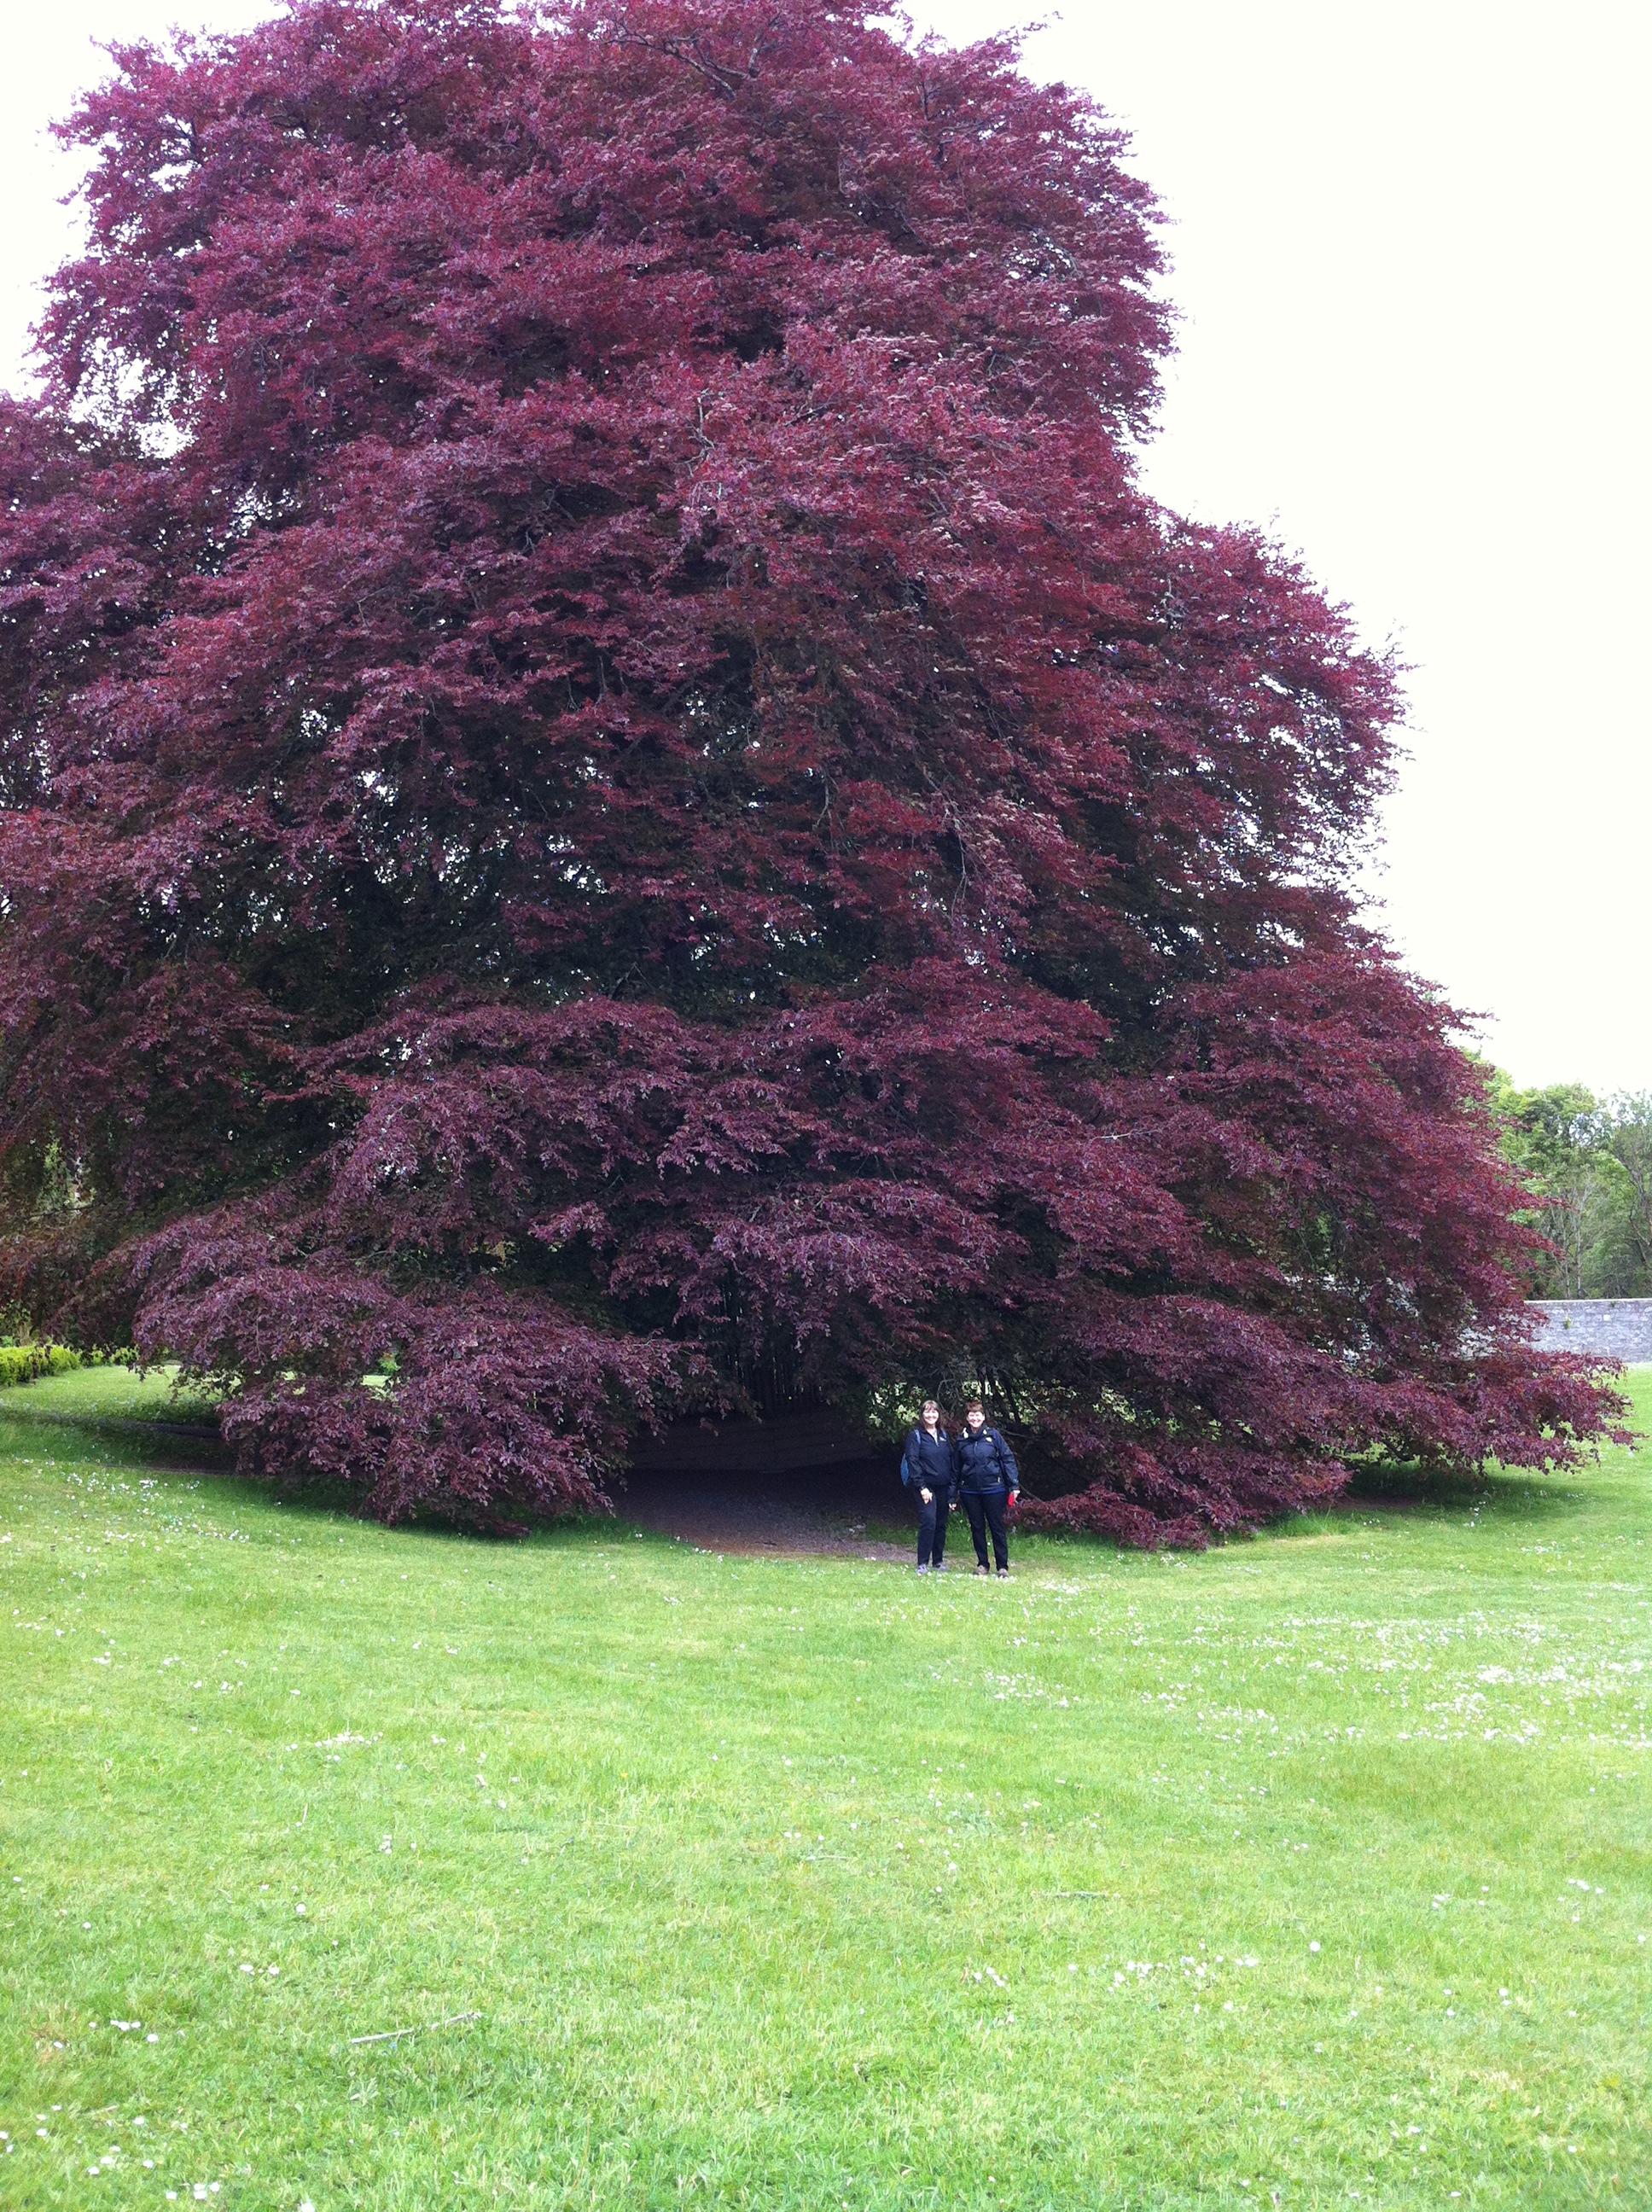 Molly and Martha standing at the base of the Autograph Tree, a copper beech tree in Coole Park. Photo by Annis Householder.